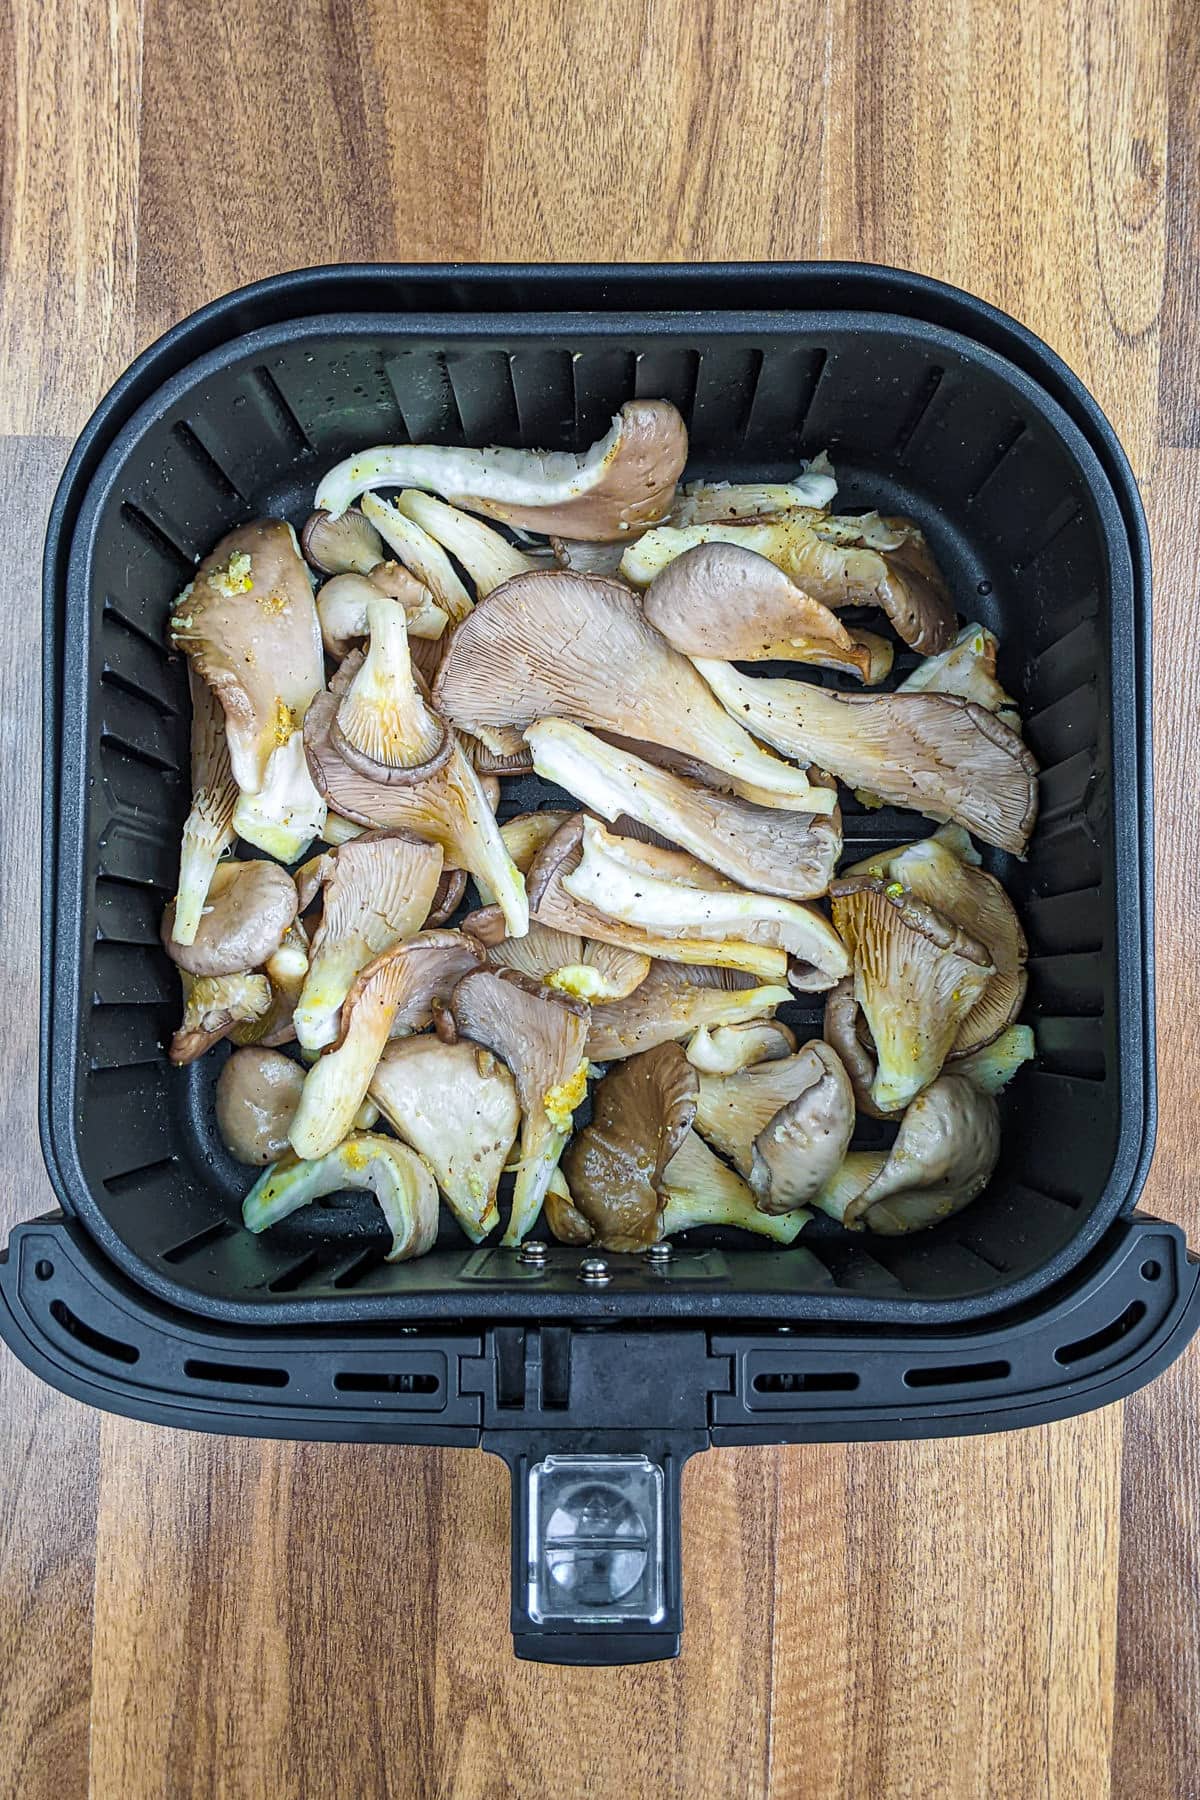 Air fryer basket with marinated oyster mushrooms.